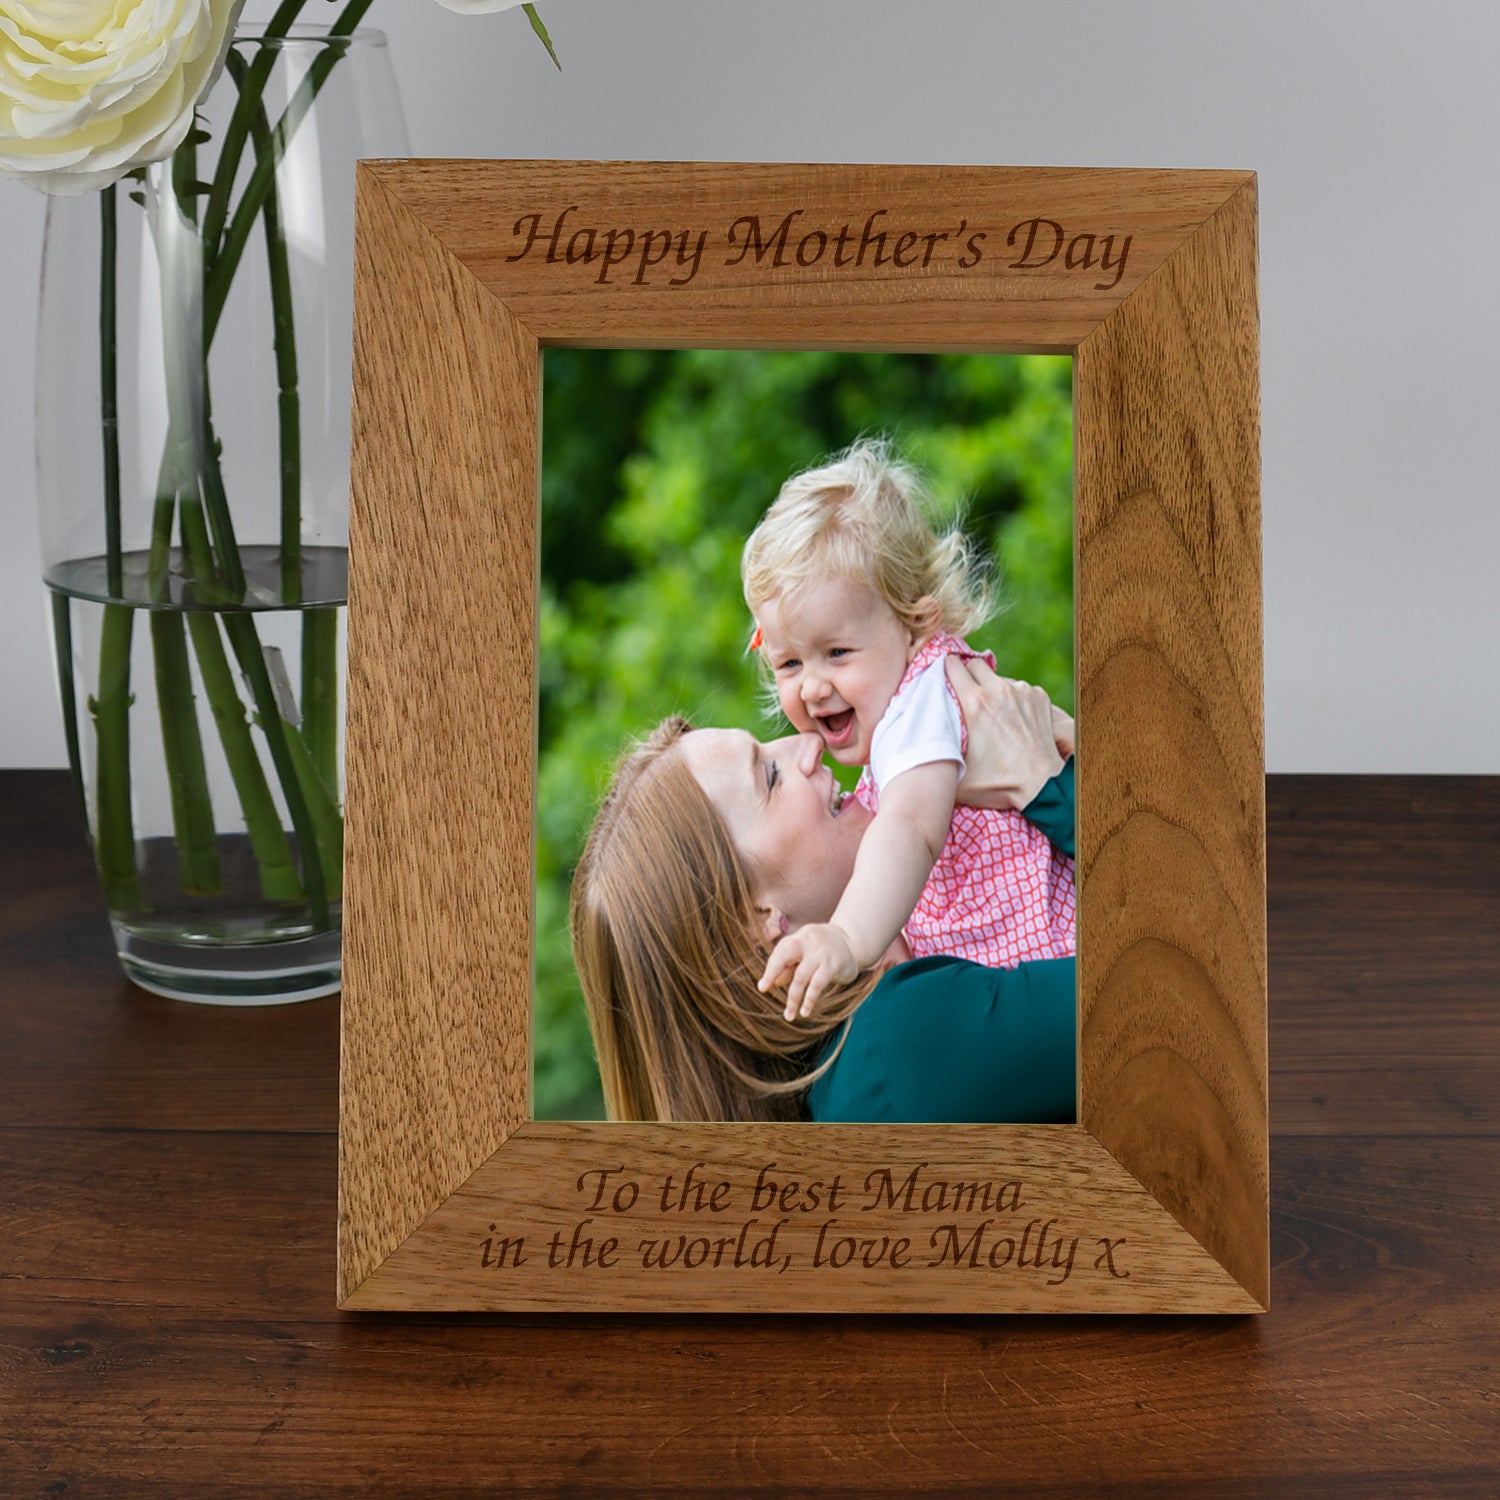 DIY Mothers day photo frame - This crafty family - crafts for kids.